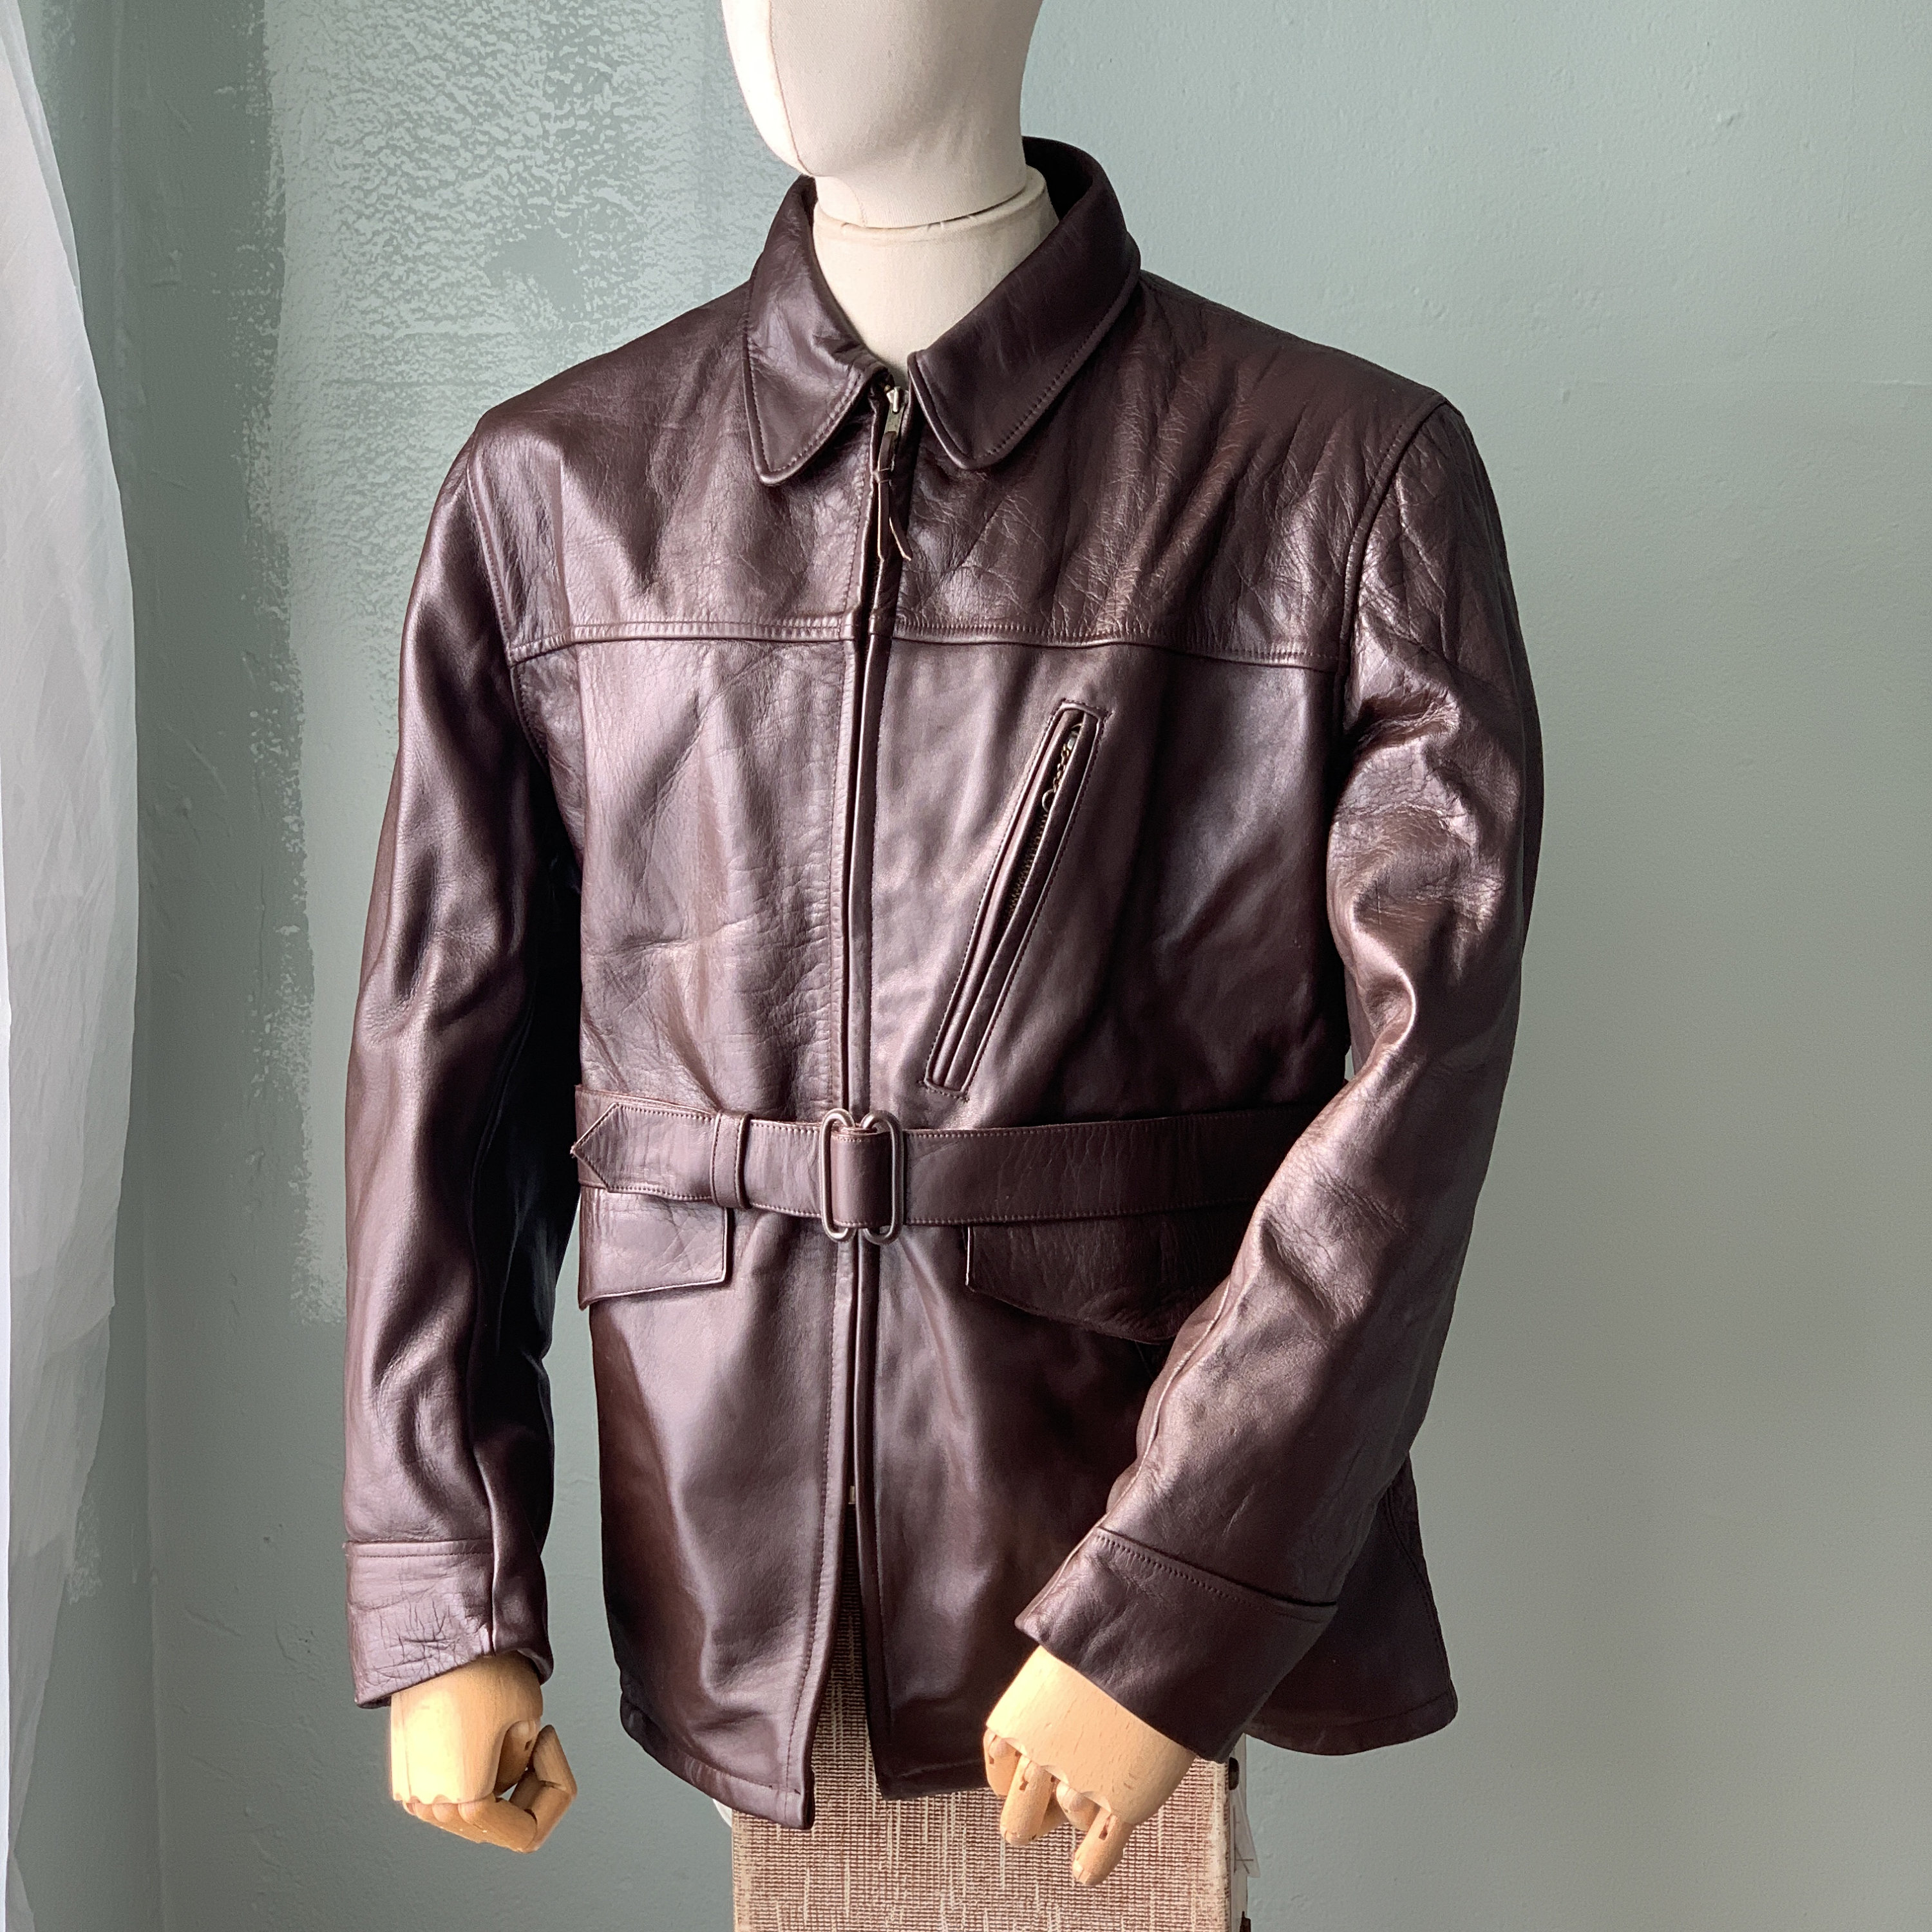 Dead-Stock Size 40 Winward HH Car Coat FS at Etsy | Vintage Leather ...